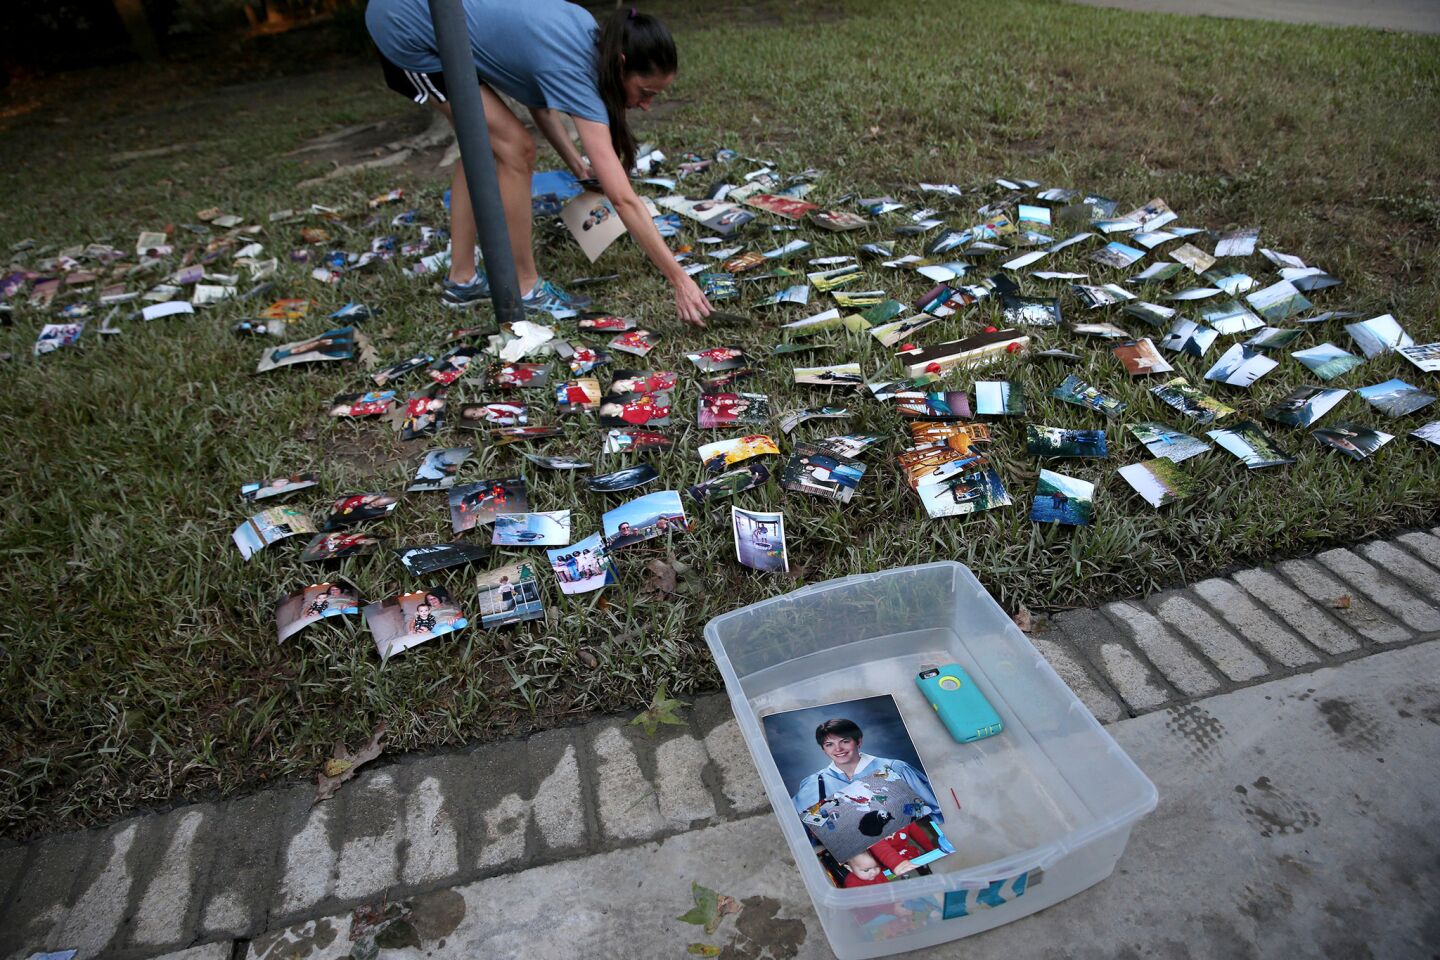 Katie Estridge organizes hundreds of soaked family photographs on the front lawn of her father's home in northeast Houston.